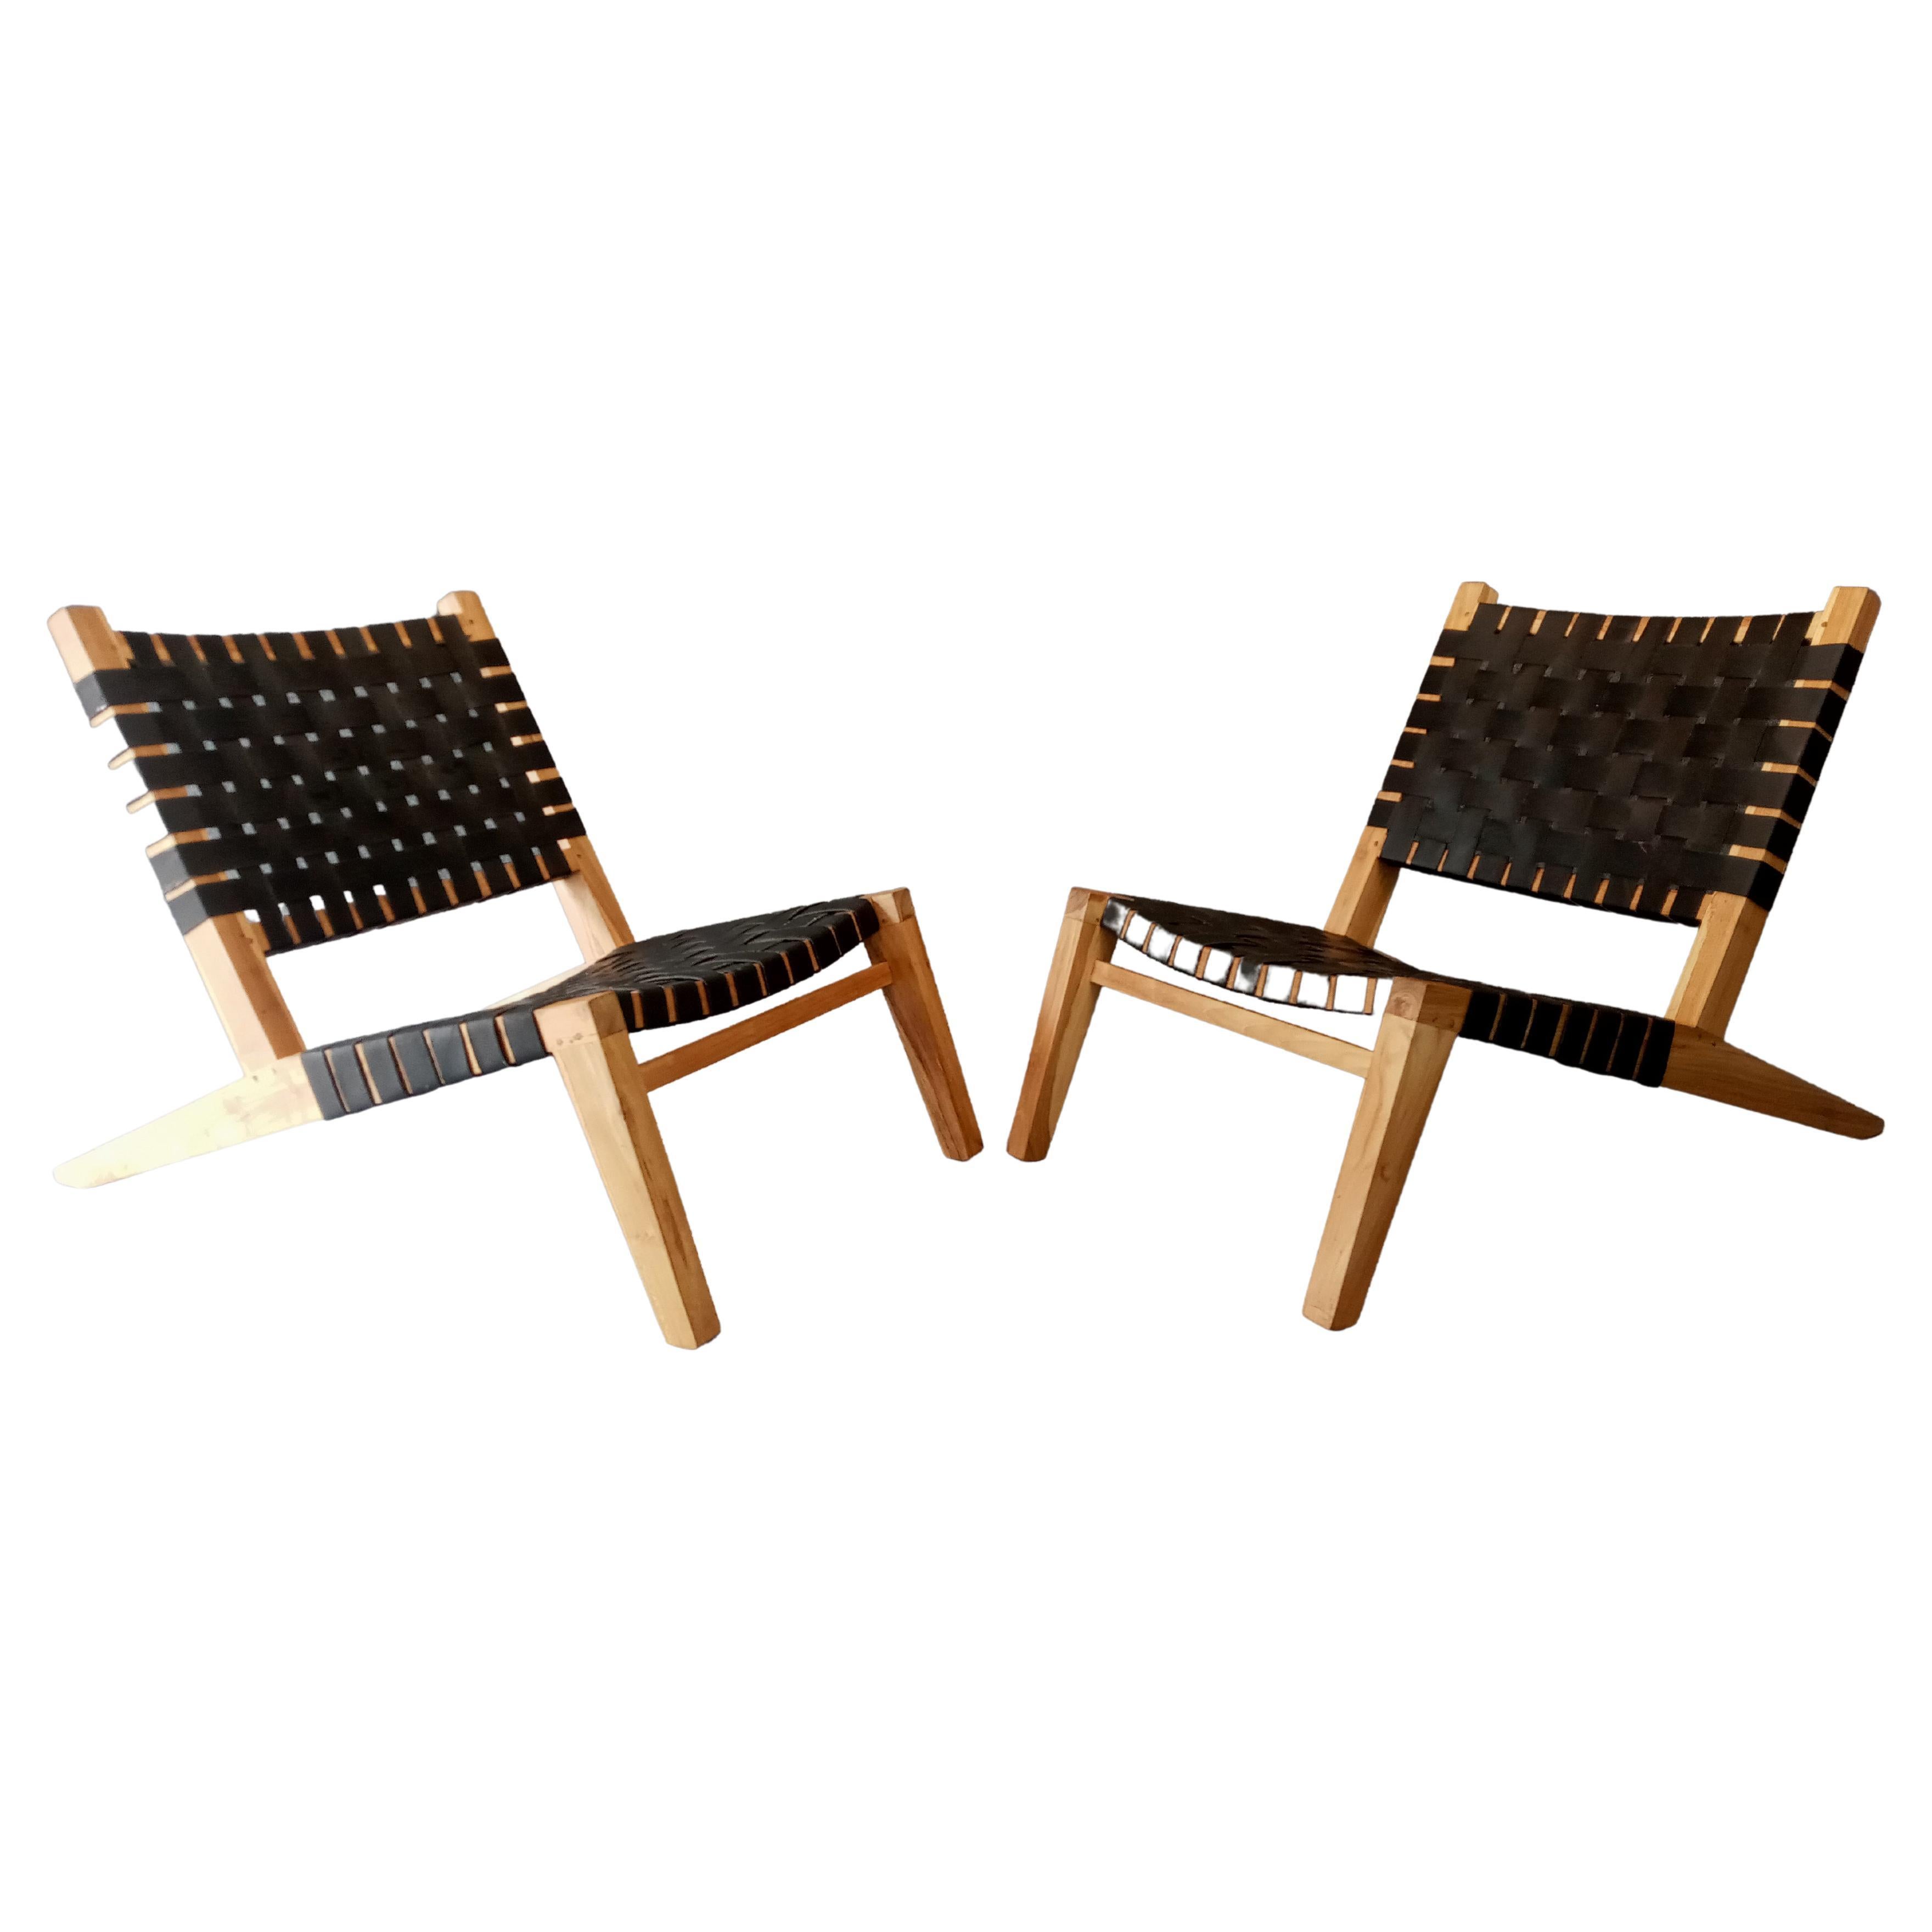 Grasshopper Lounge Chairs Pair, Mid-Century Inspired, Teak Frames, Woven Straps For Sale